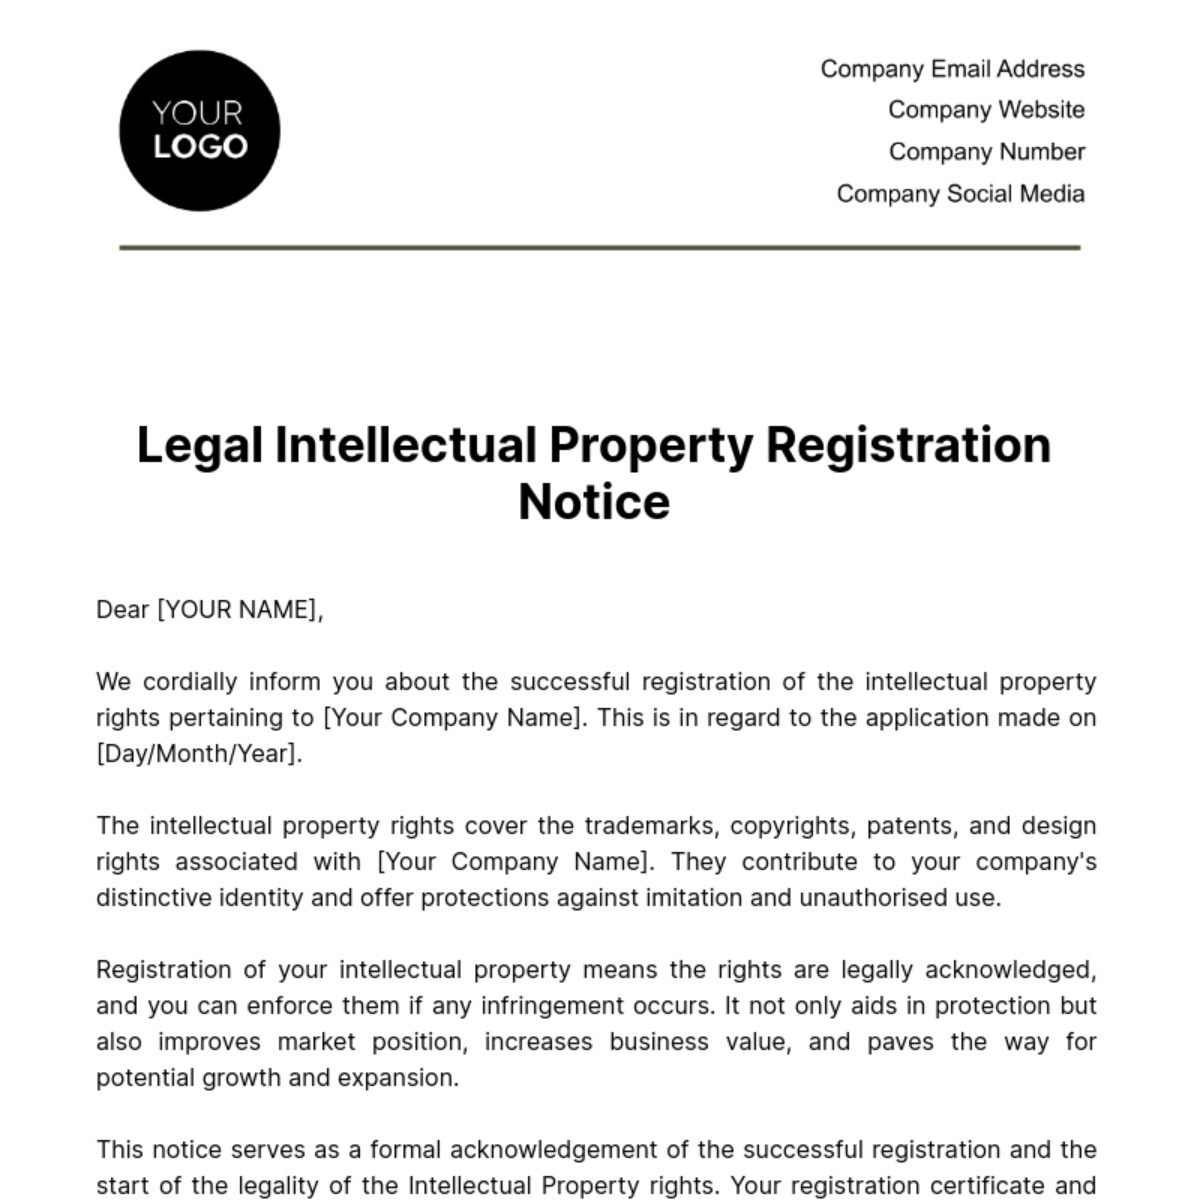 Free Legal Intellectual Property Registration Notice Template